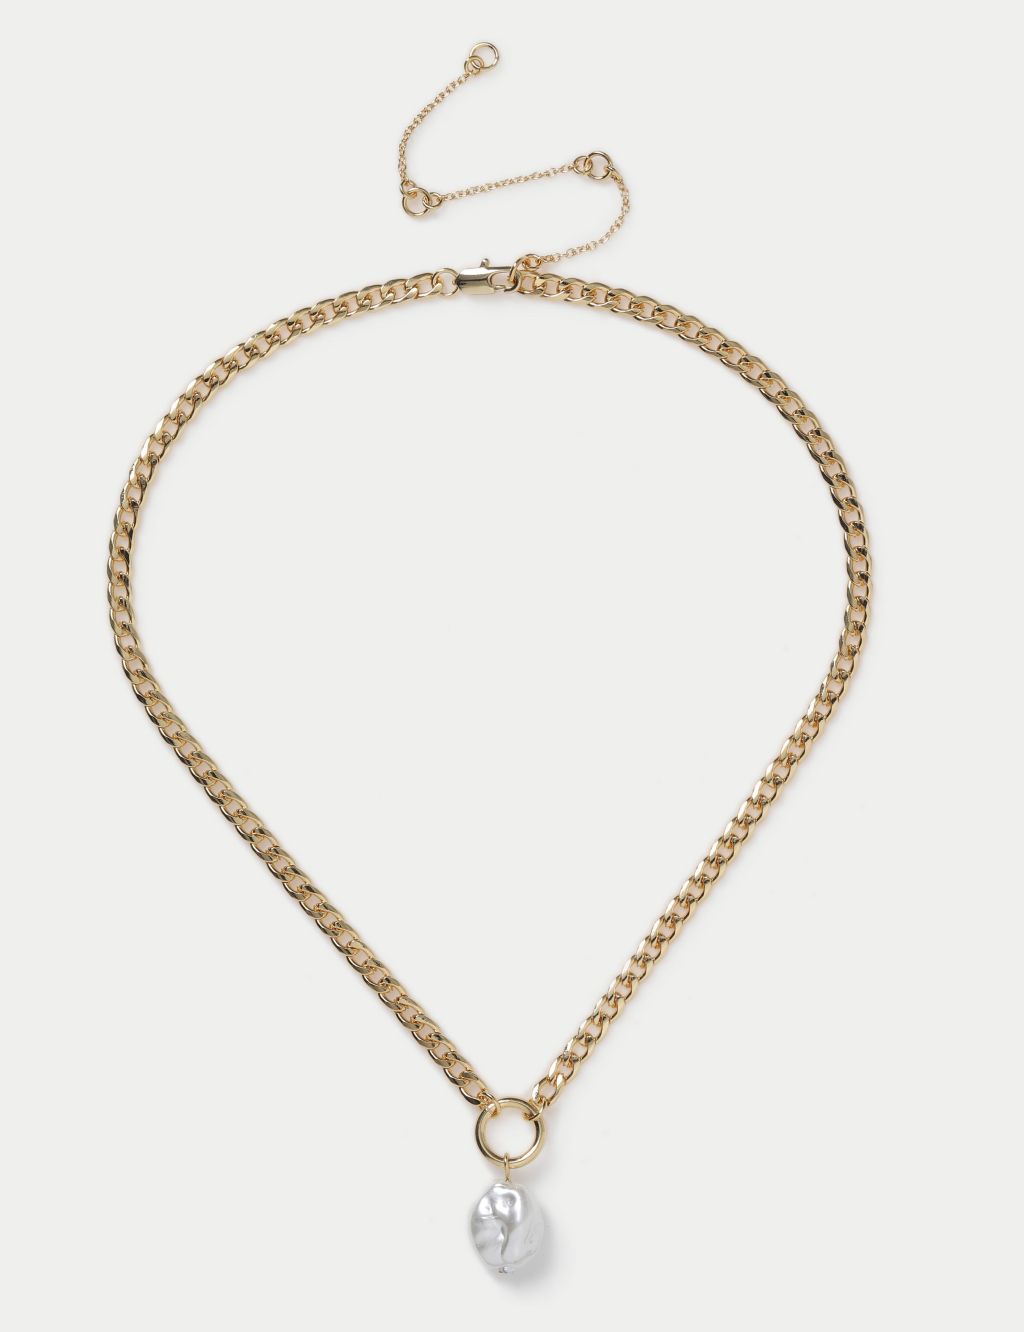 Gold Plated Fresh Water Pearl Chain Necklace